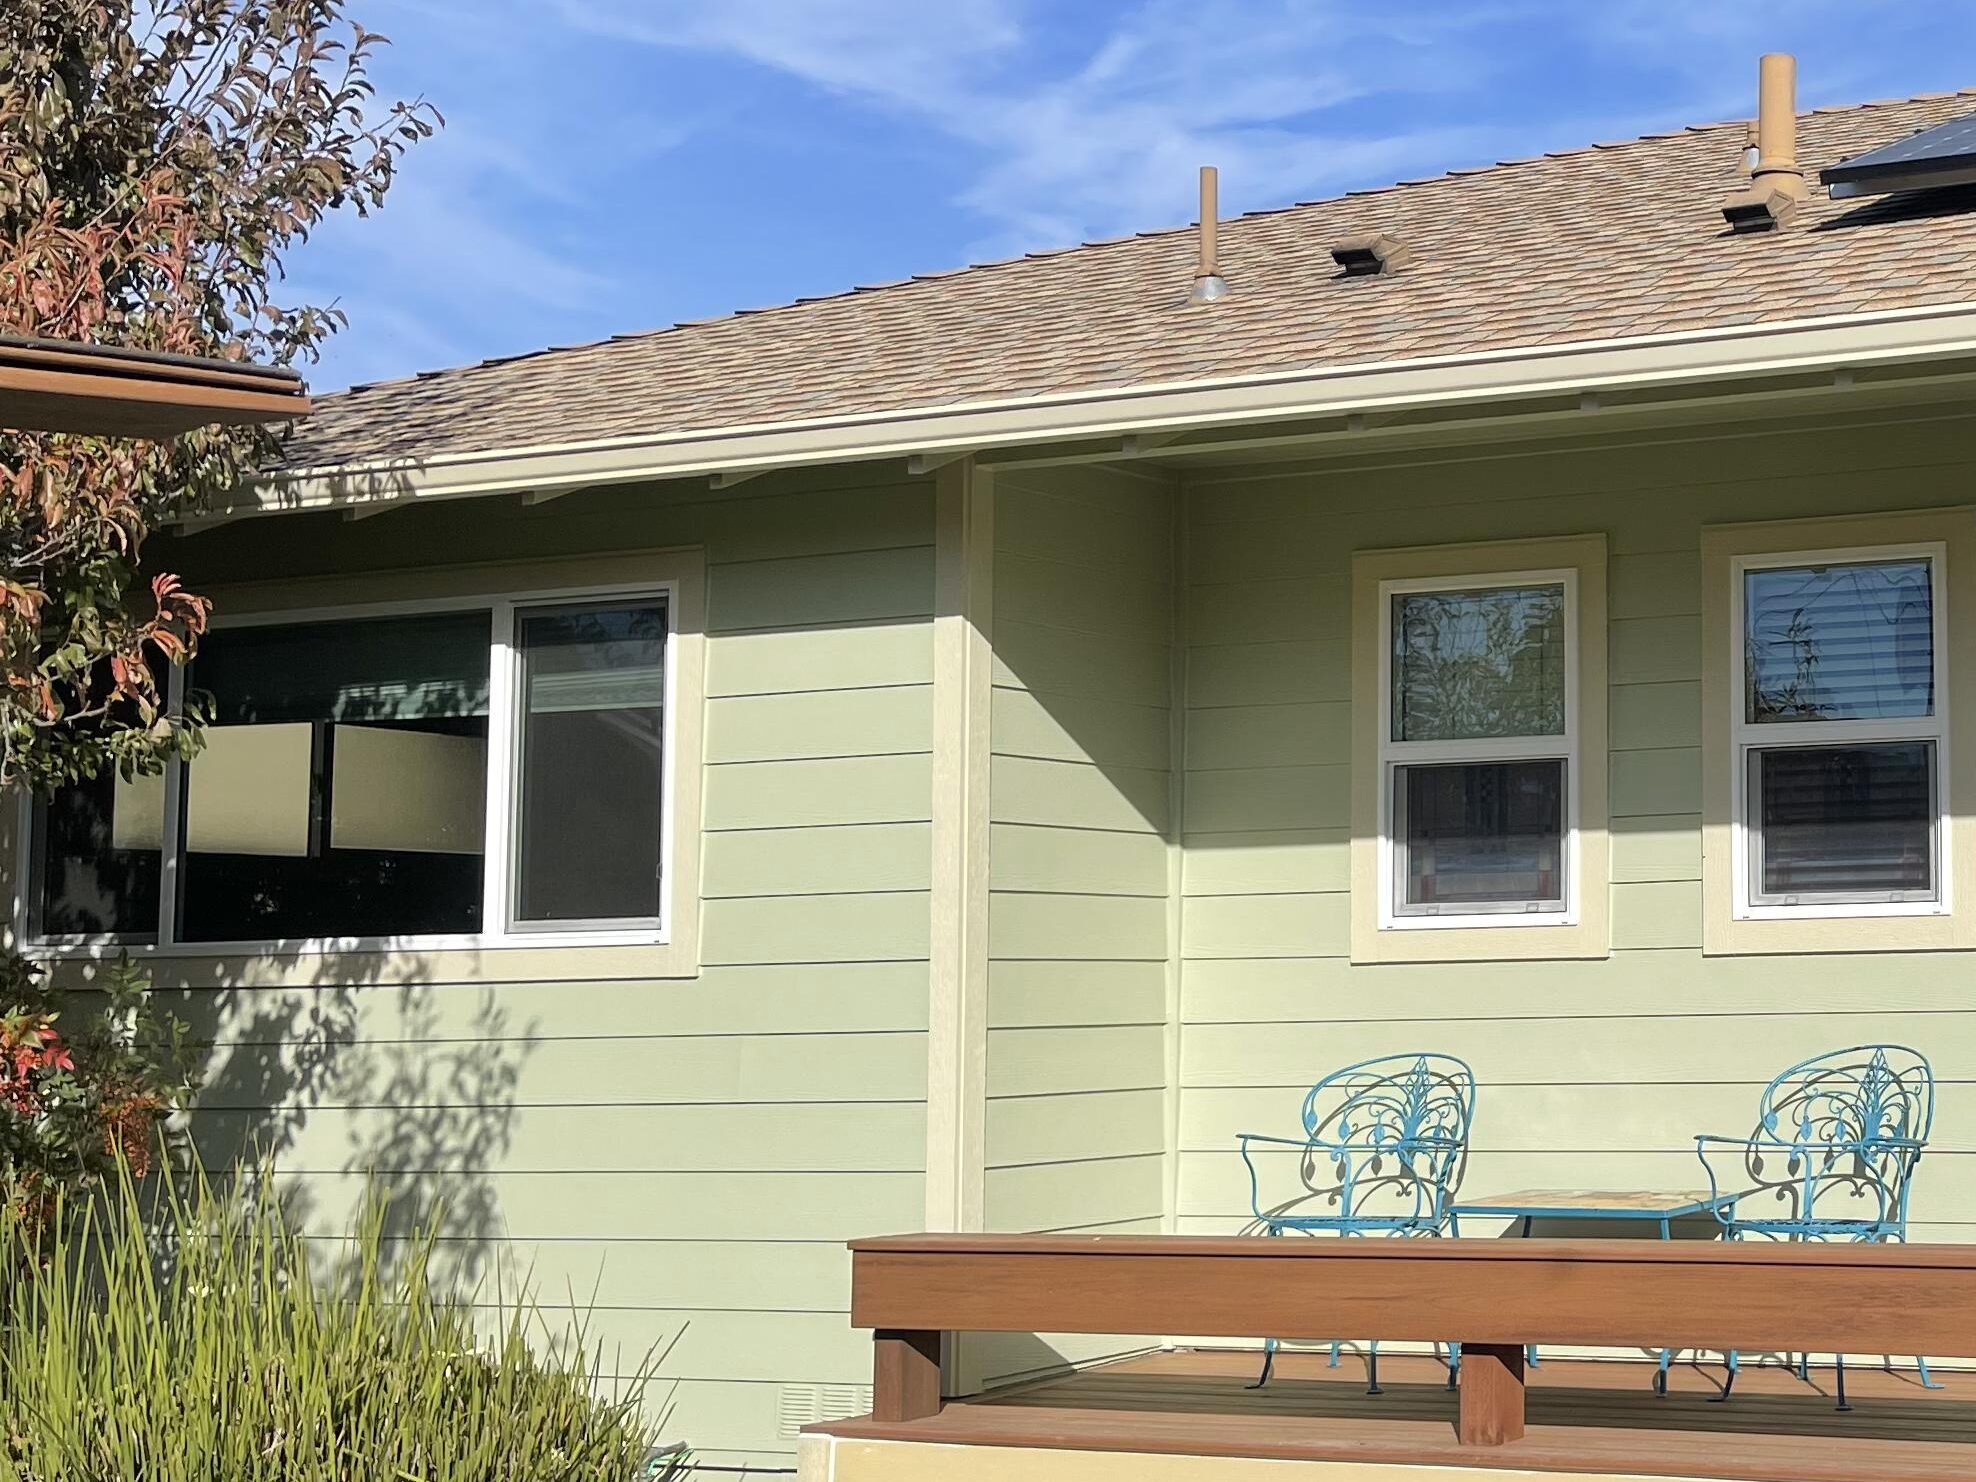 Why James Hardie Siding for Your Sacramento Home?